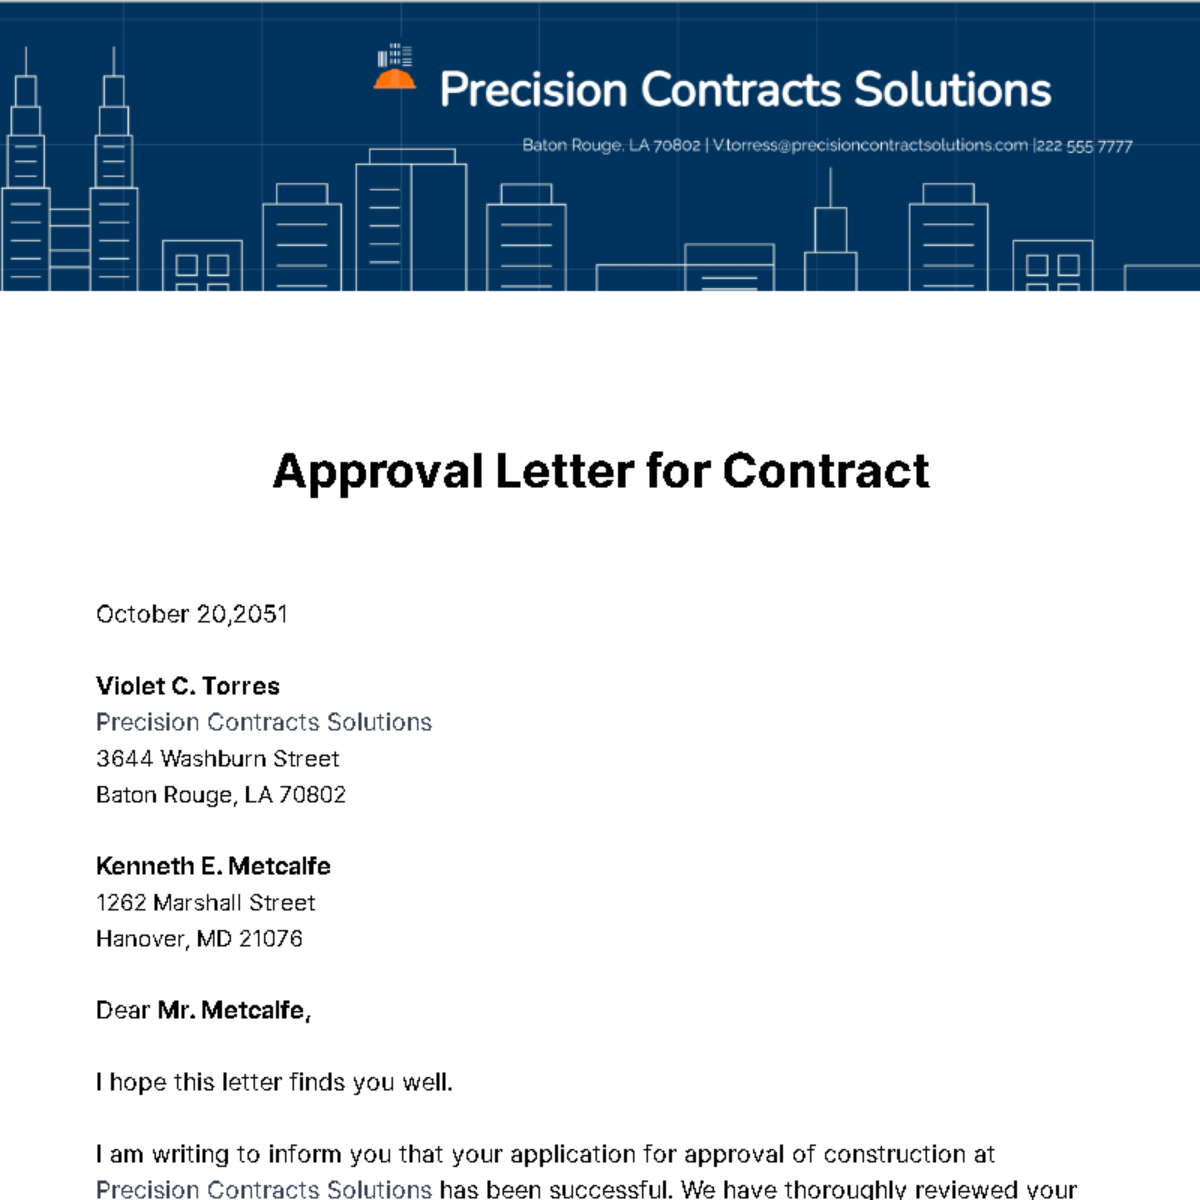 Approval Letter for Contract  Template